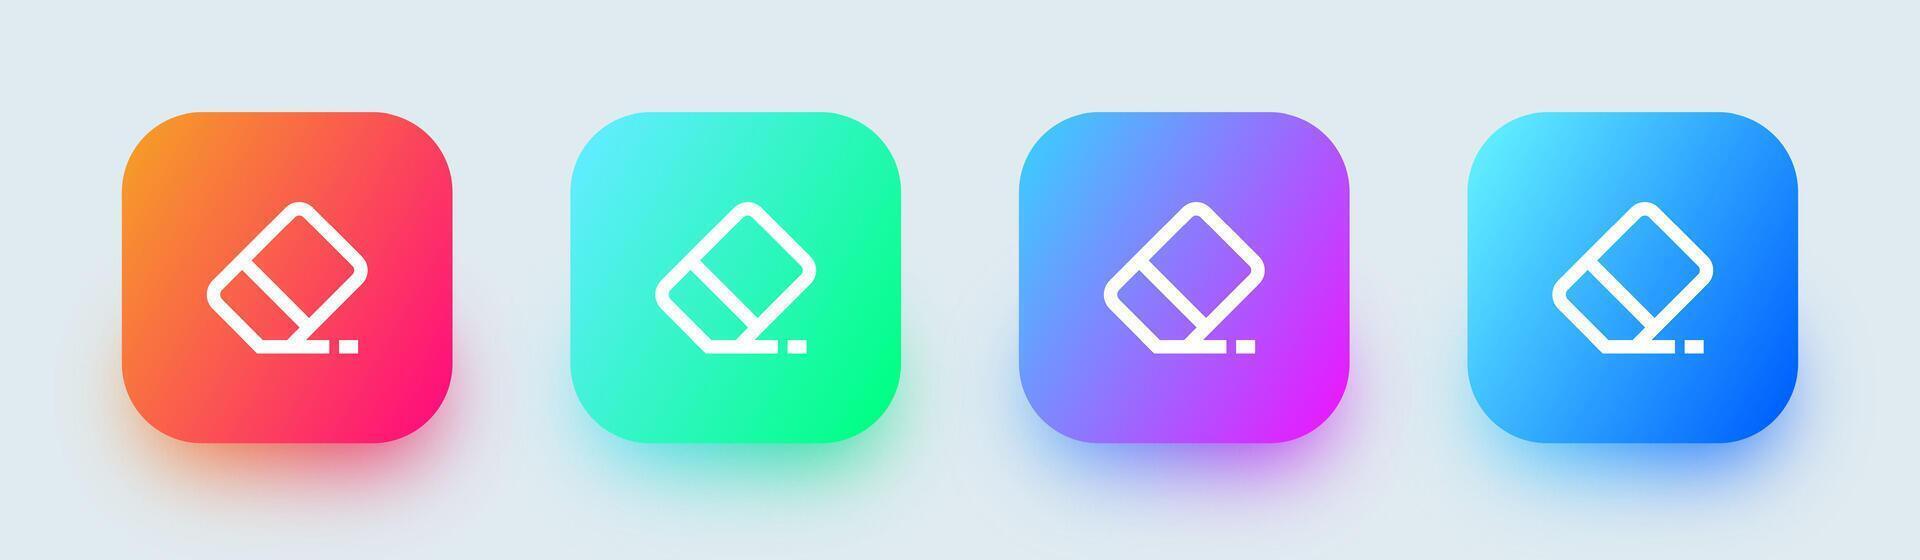 Eraser line icon in square gradient colors. Wipe out signs vector illustration.